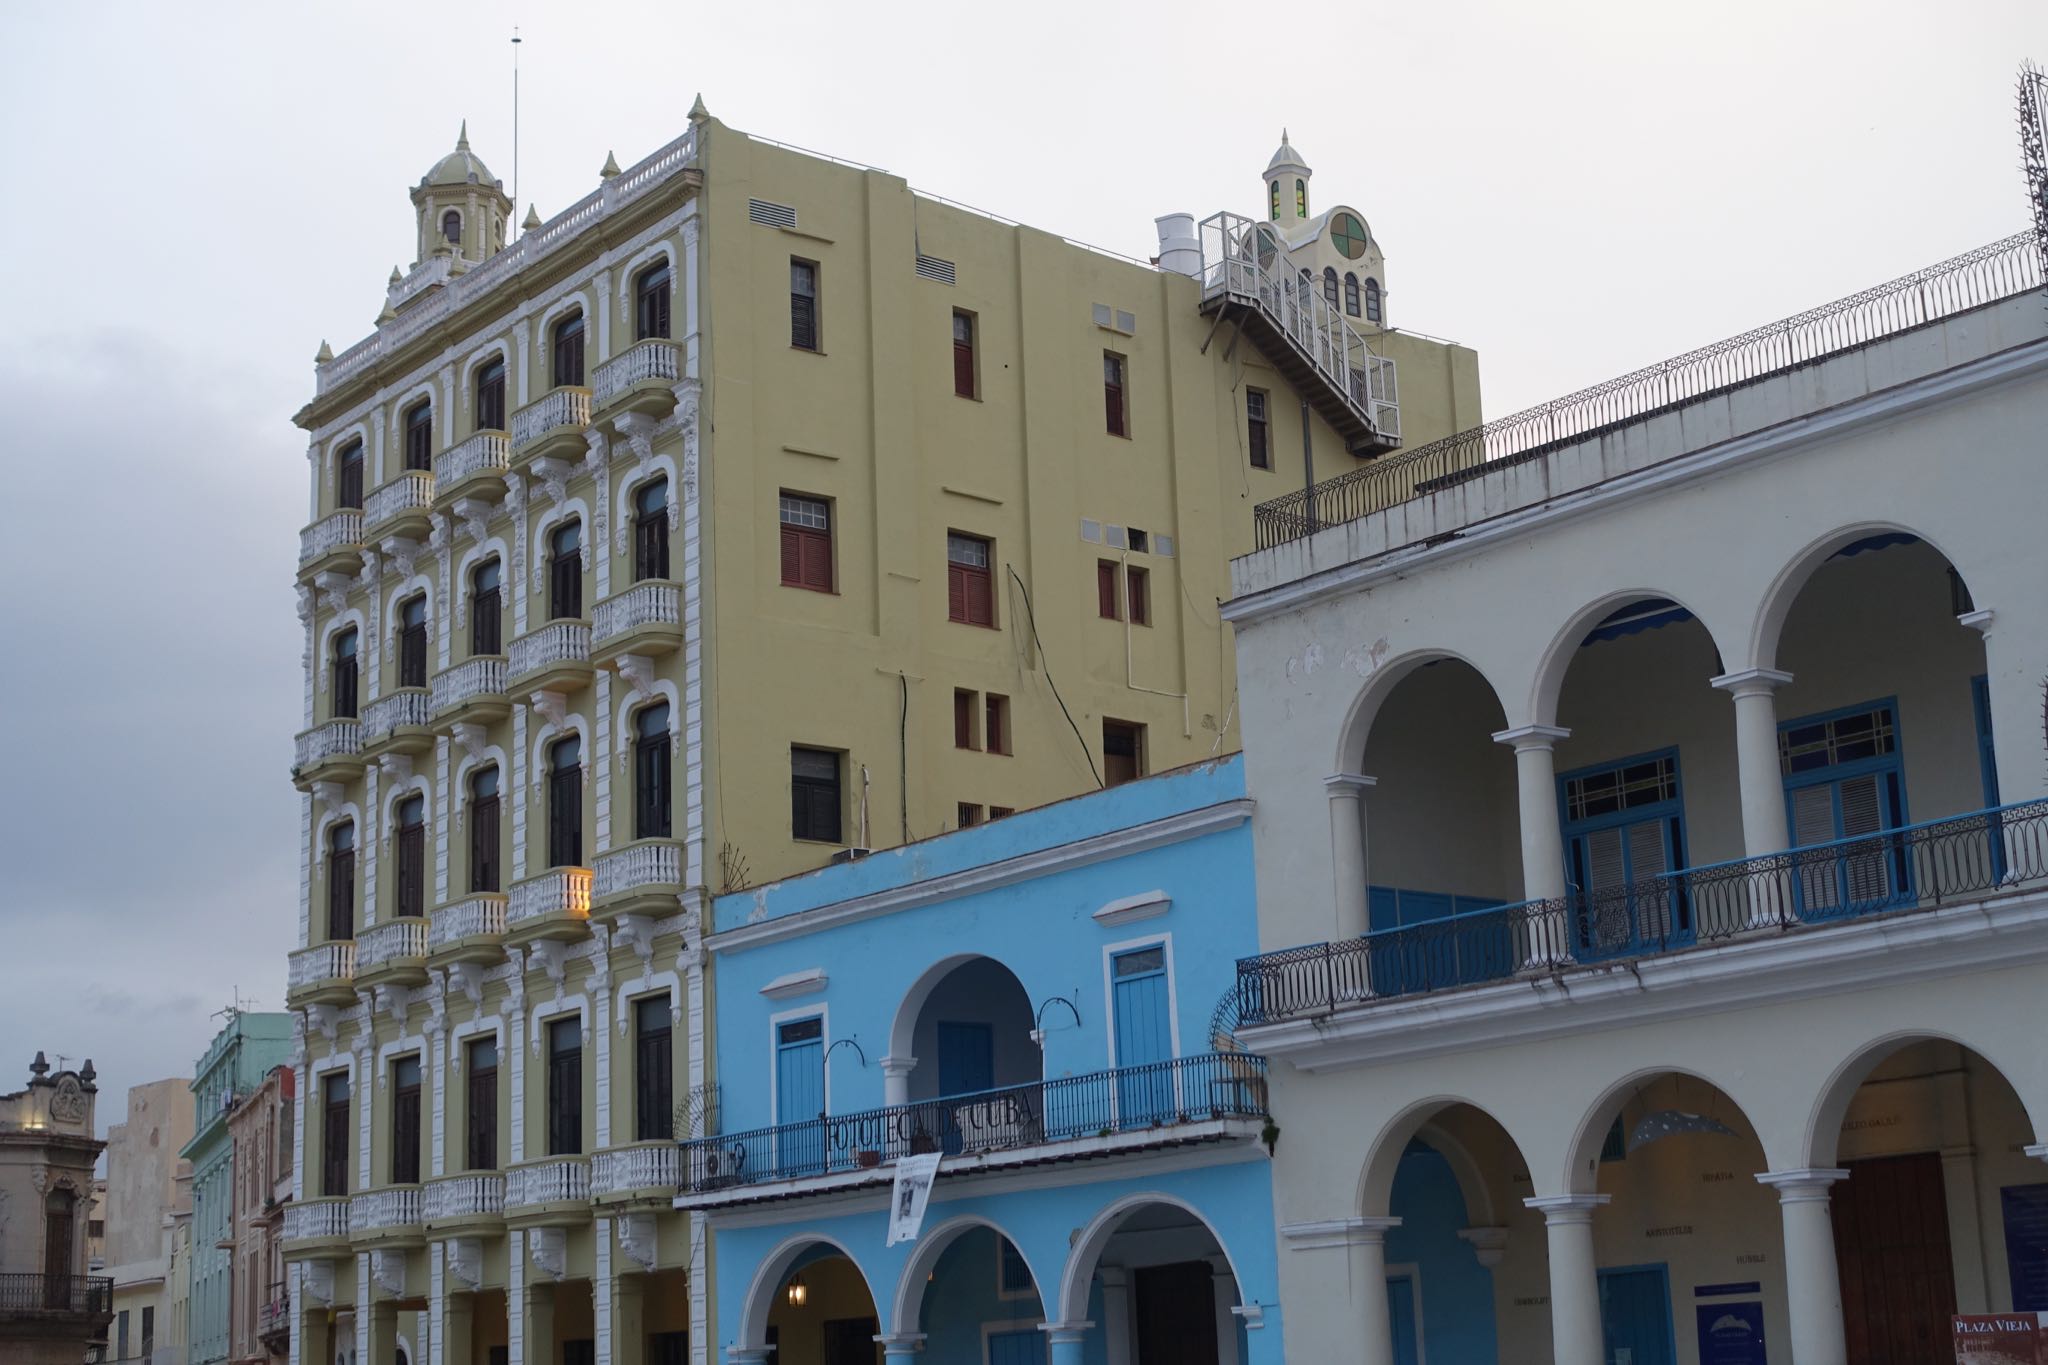 Photo 126 of 221 from the album Highlights Cuba 2019.